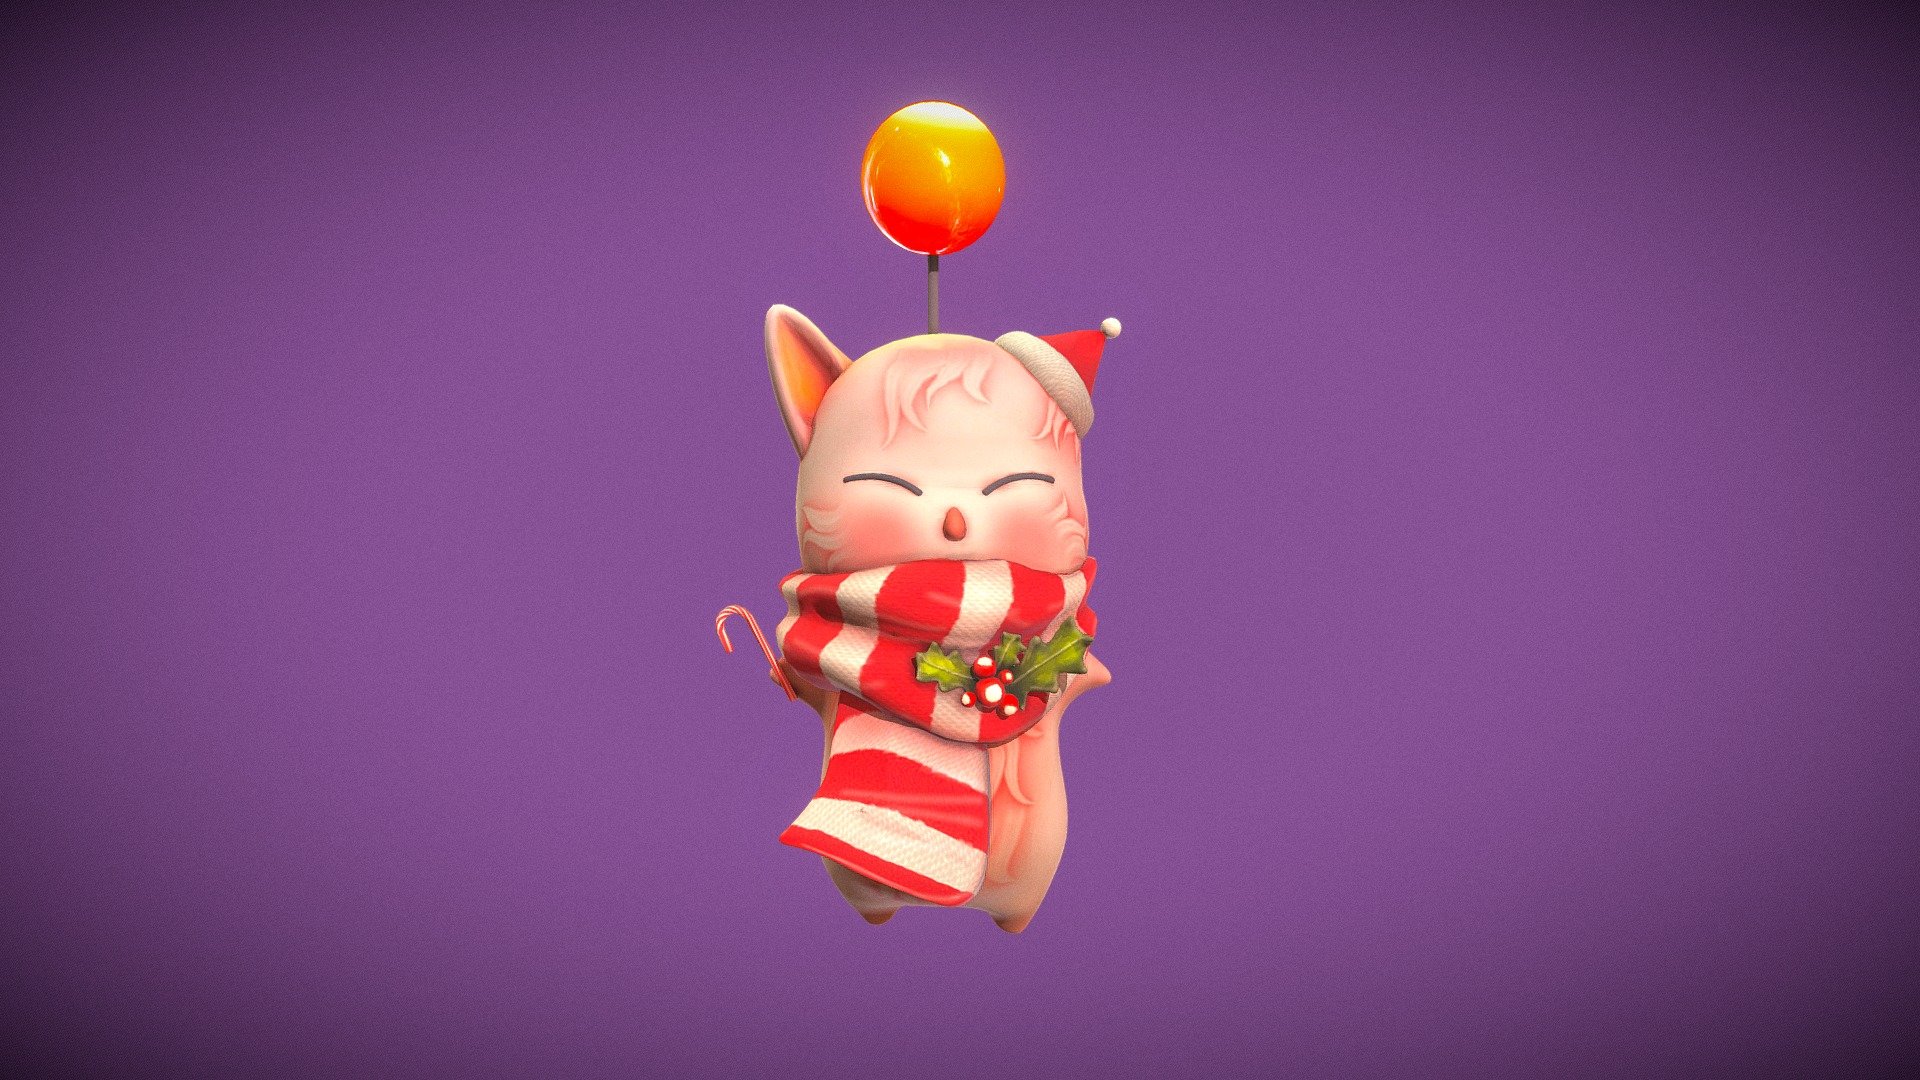 Lovingly made for the Beyond Extent Community Challenge &lt;3 - Christmas Moogle - 3D model by Ioana Oprisan (@ioanaoprisan) 3d model